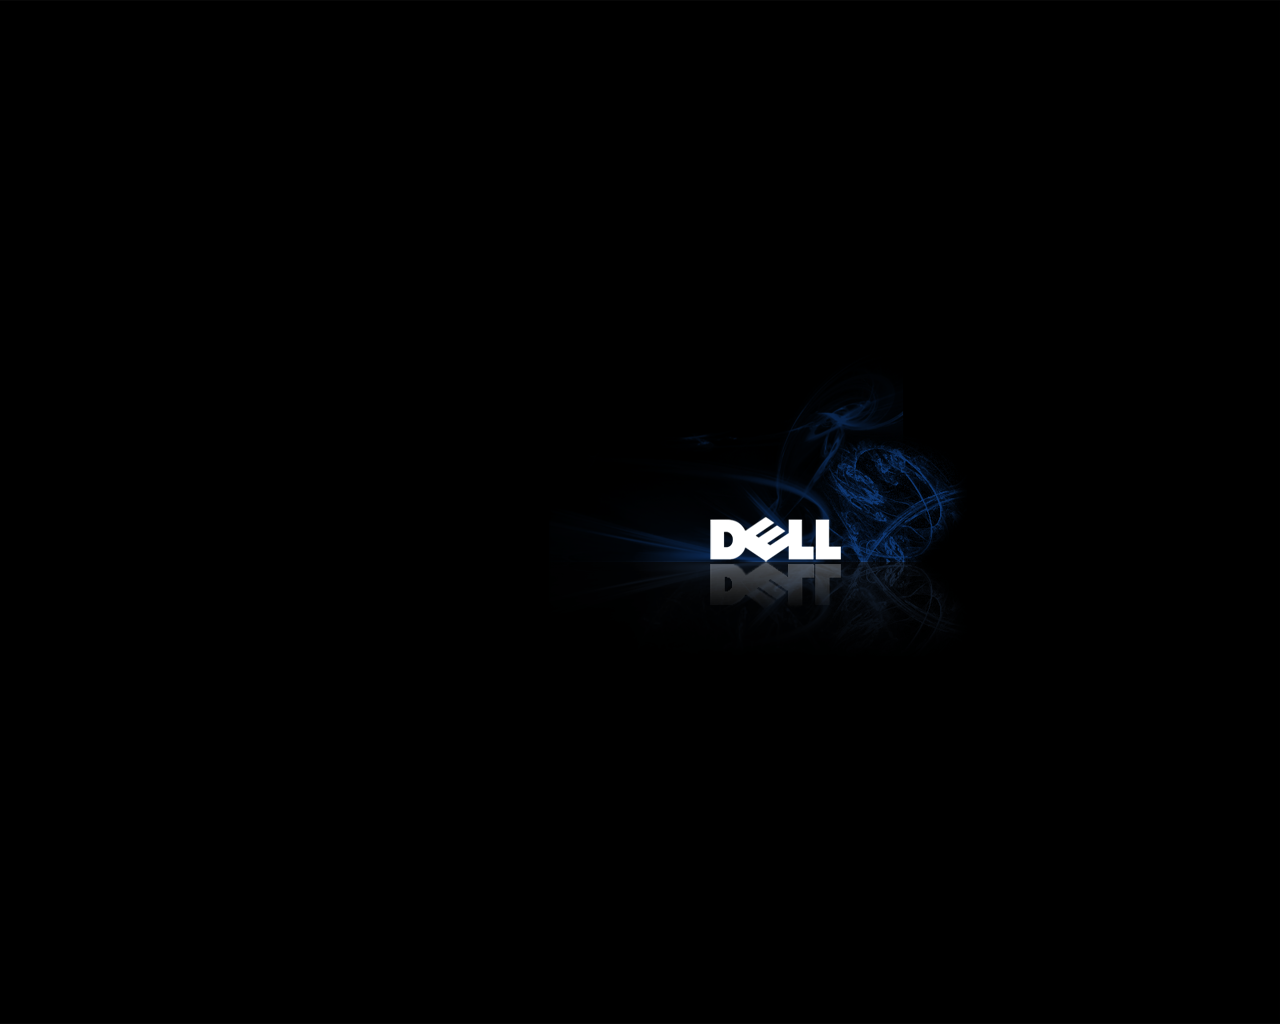 dell wallpapers dell wallpapers free wallpapers hd wallpapers